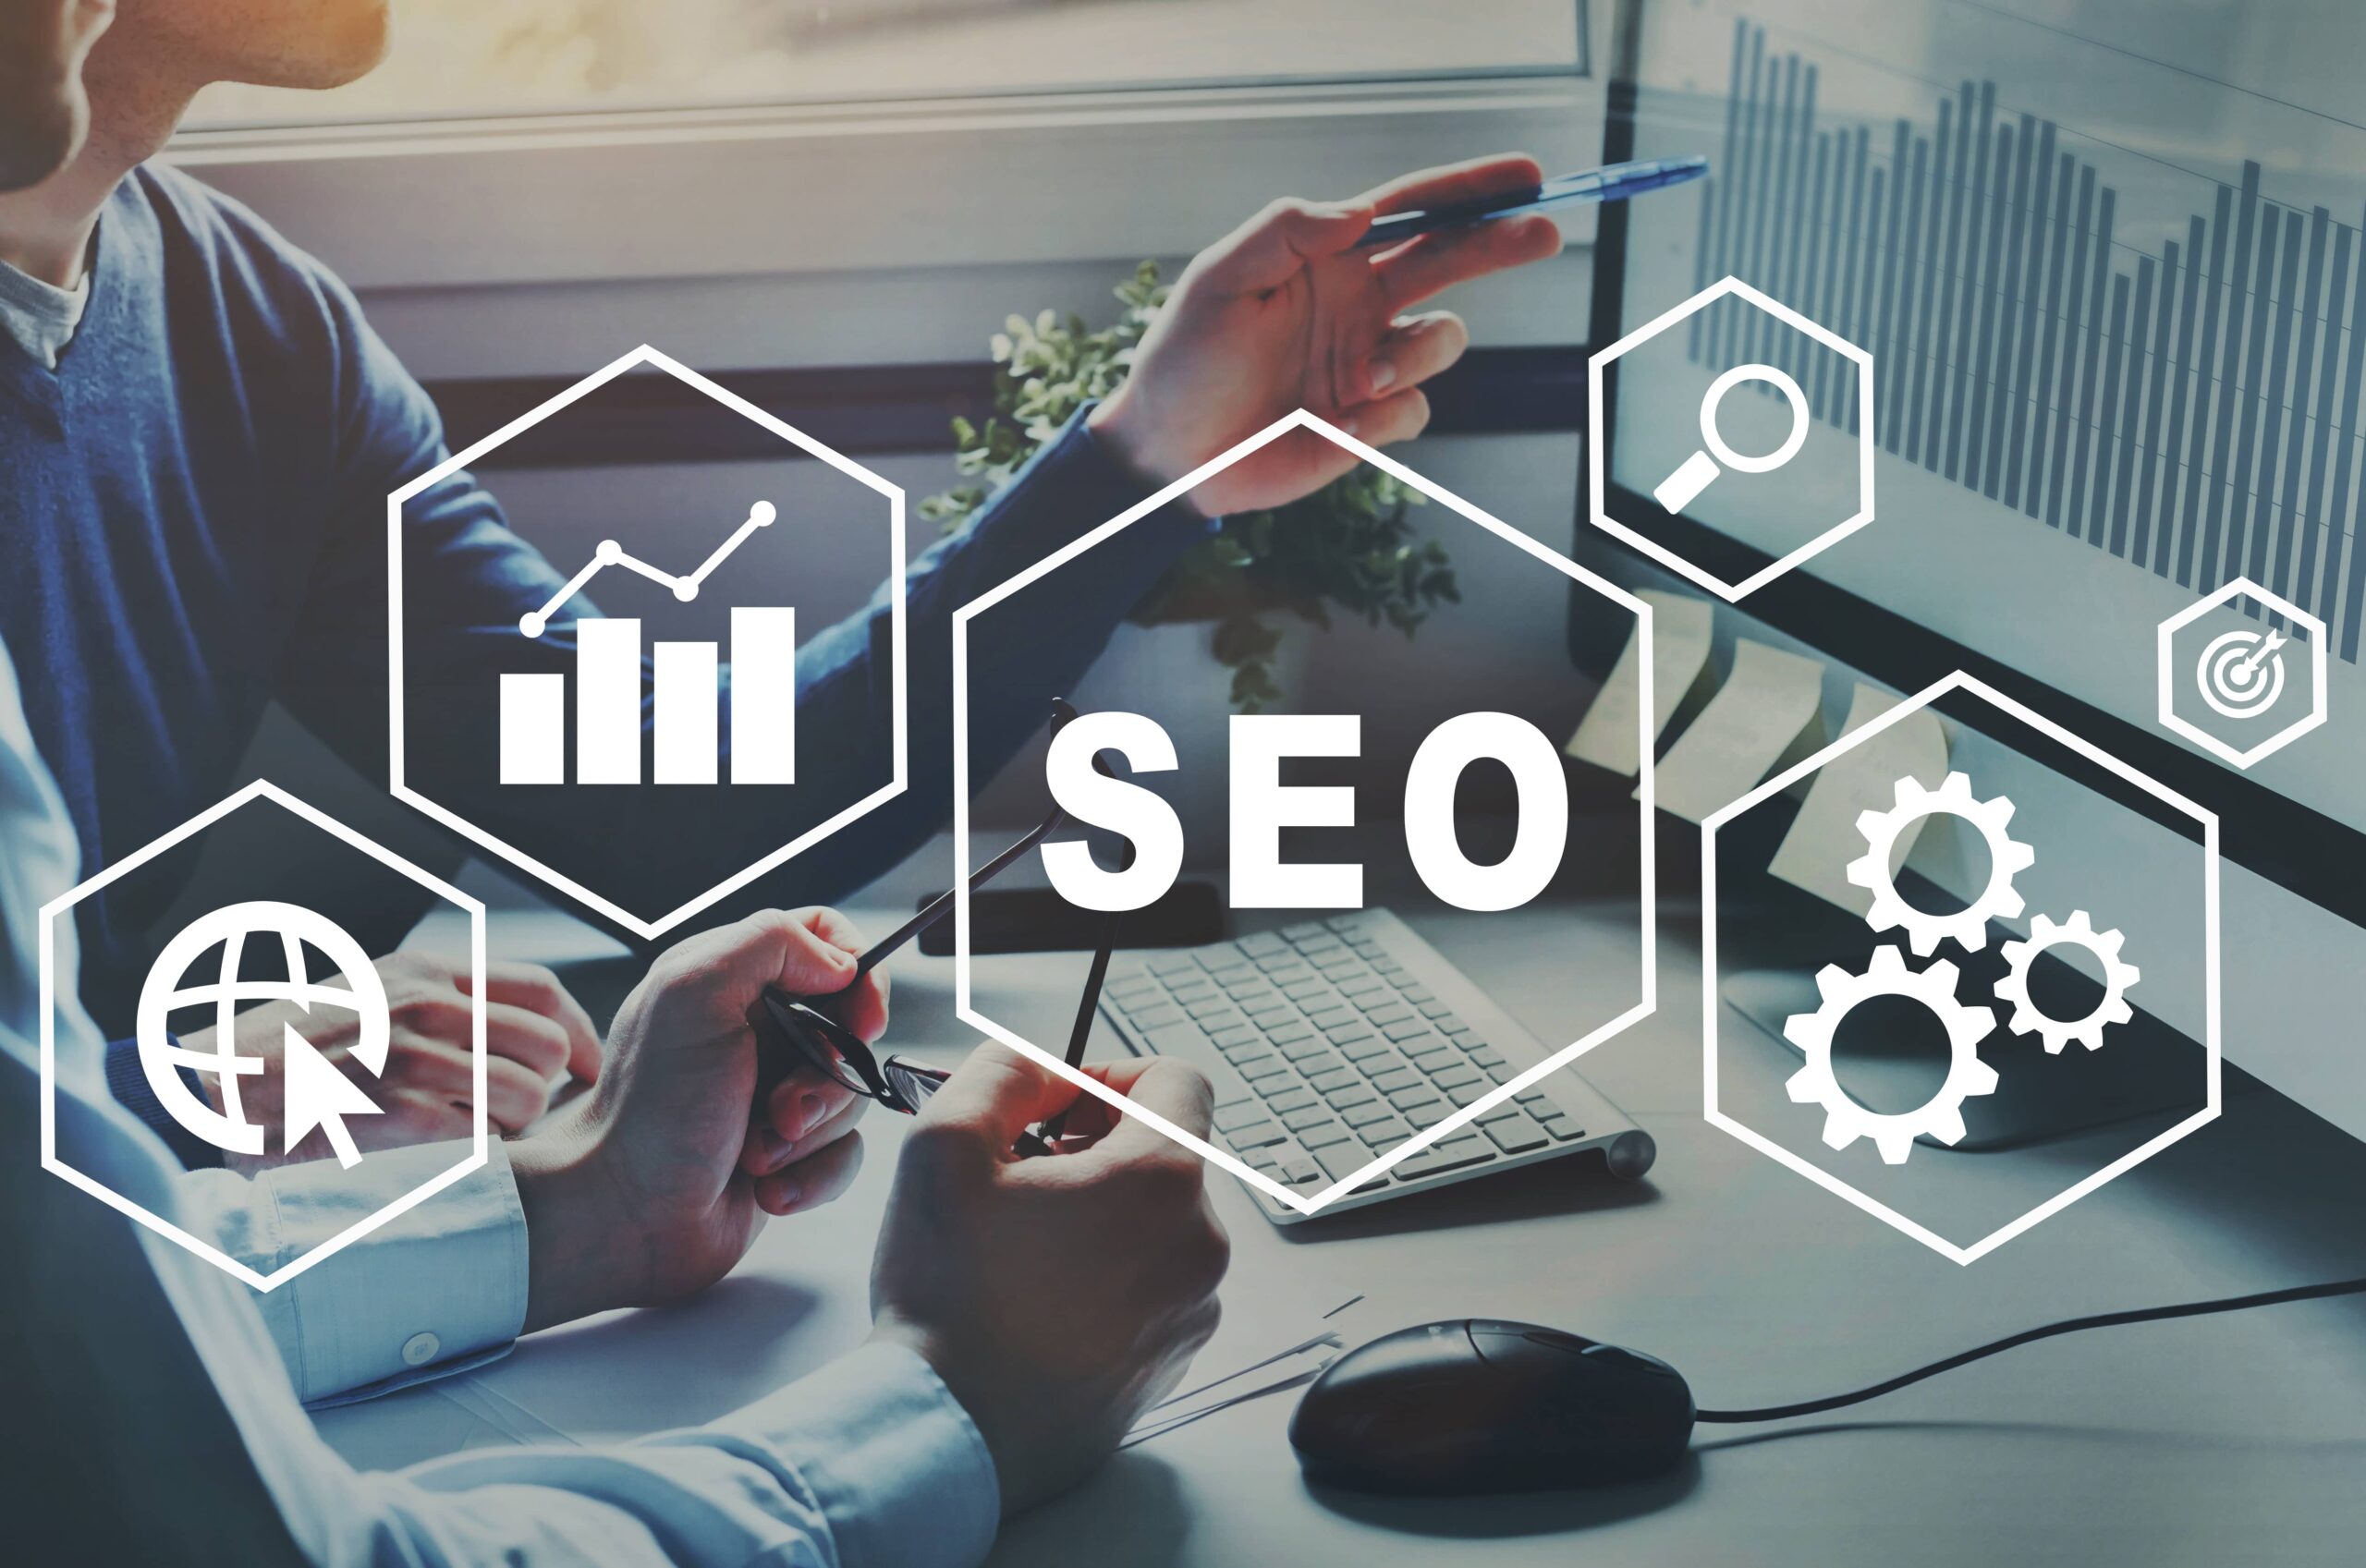 What is Technical SEO?